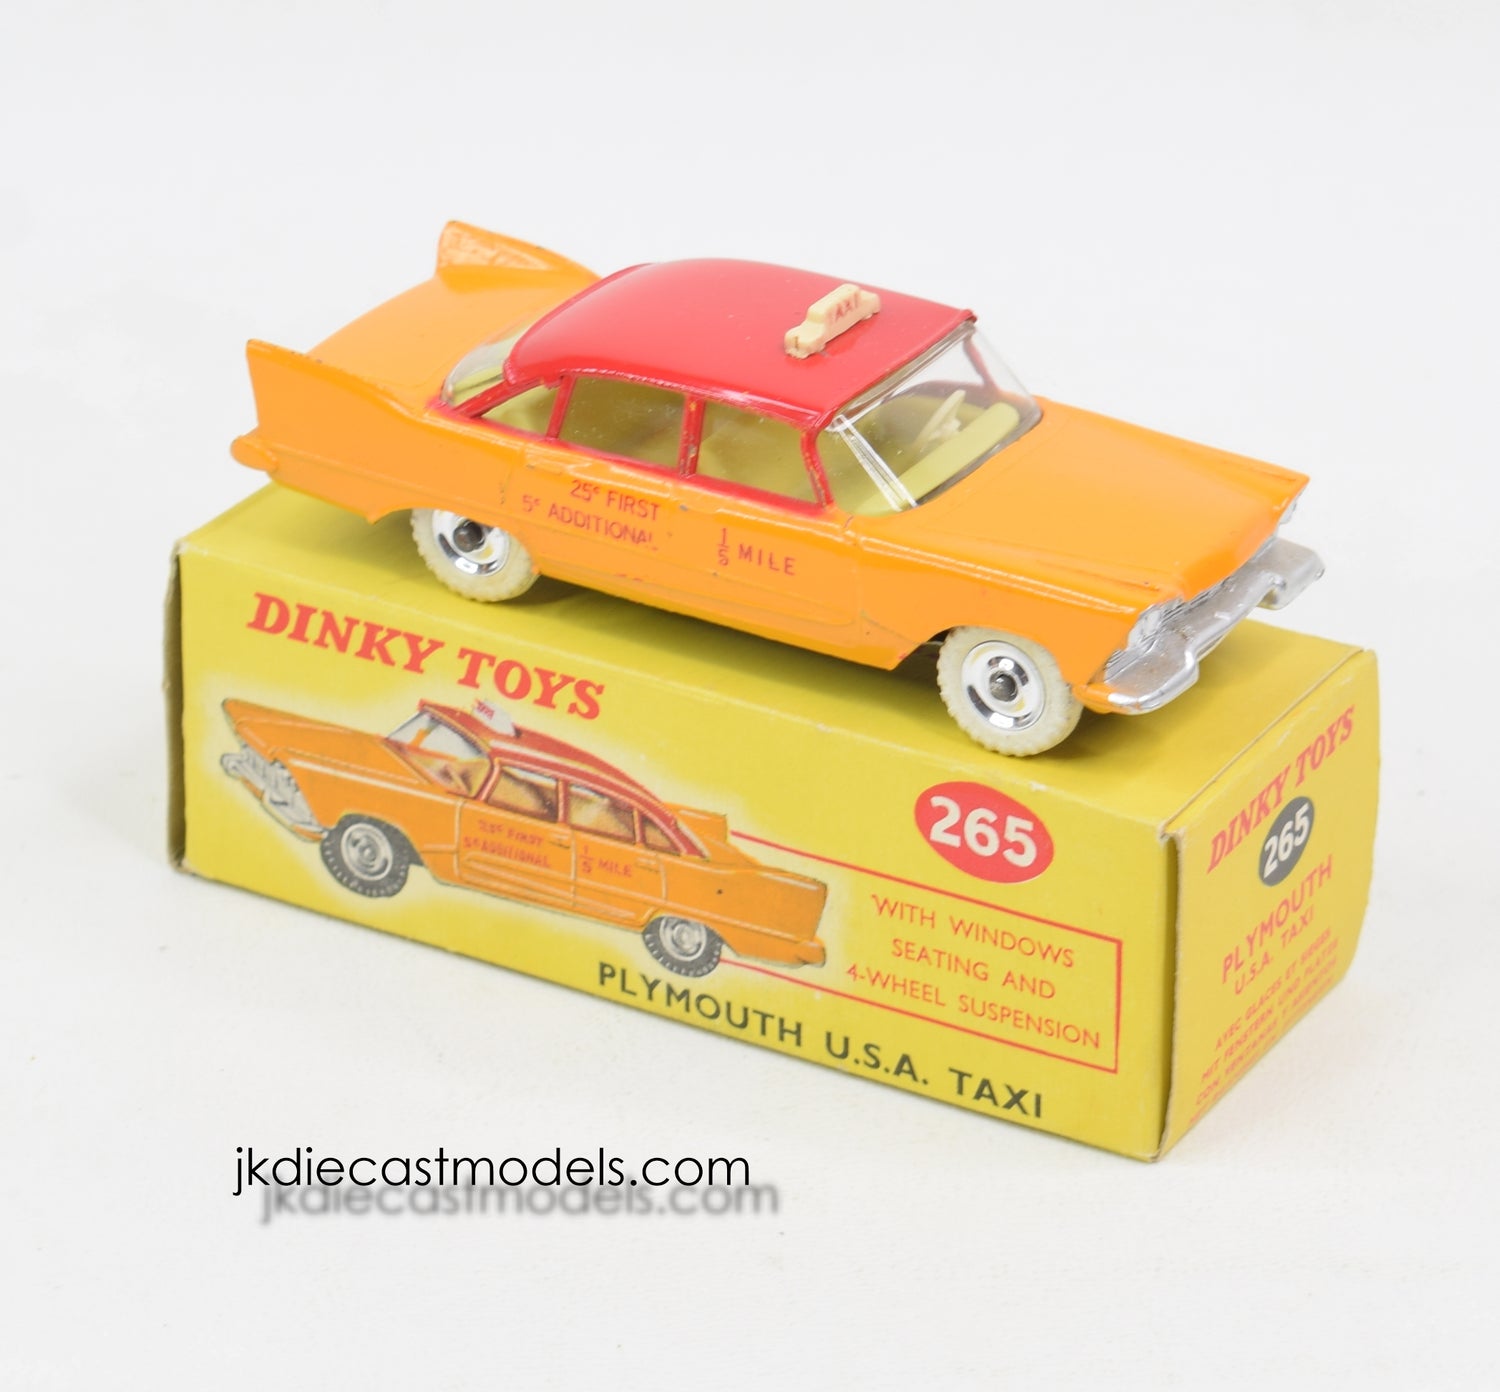 Dinky toys 265 Plymouth U.S.A Taxi Virtually Mint/Boxed 'BGS Collection'